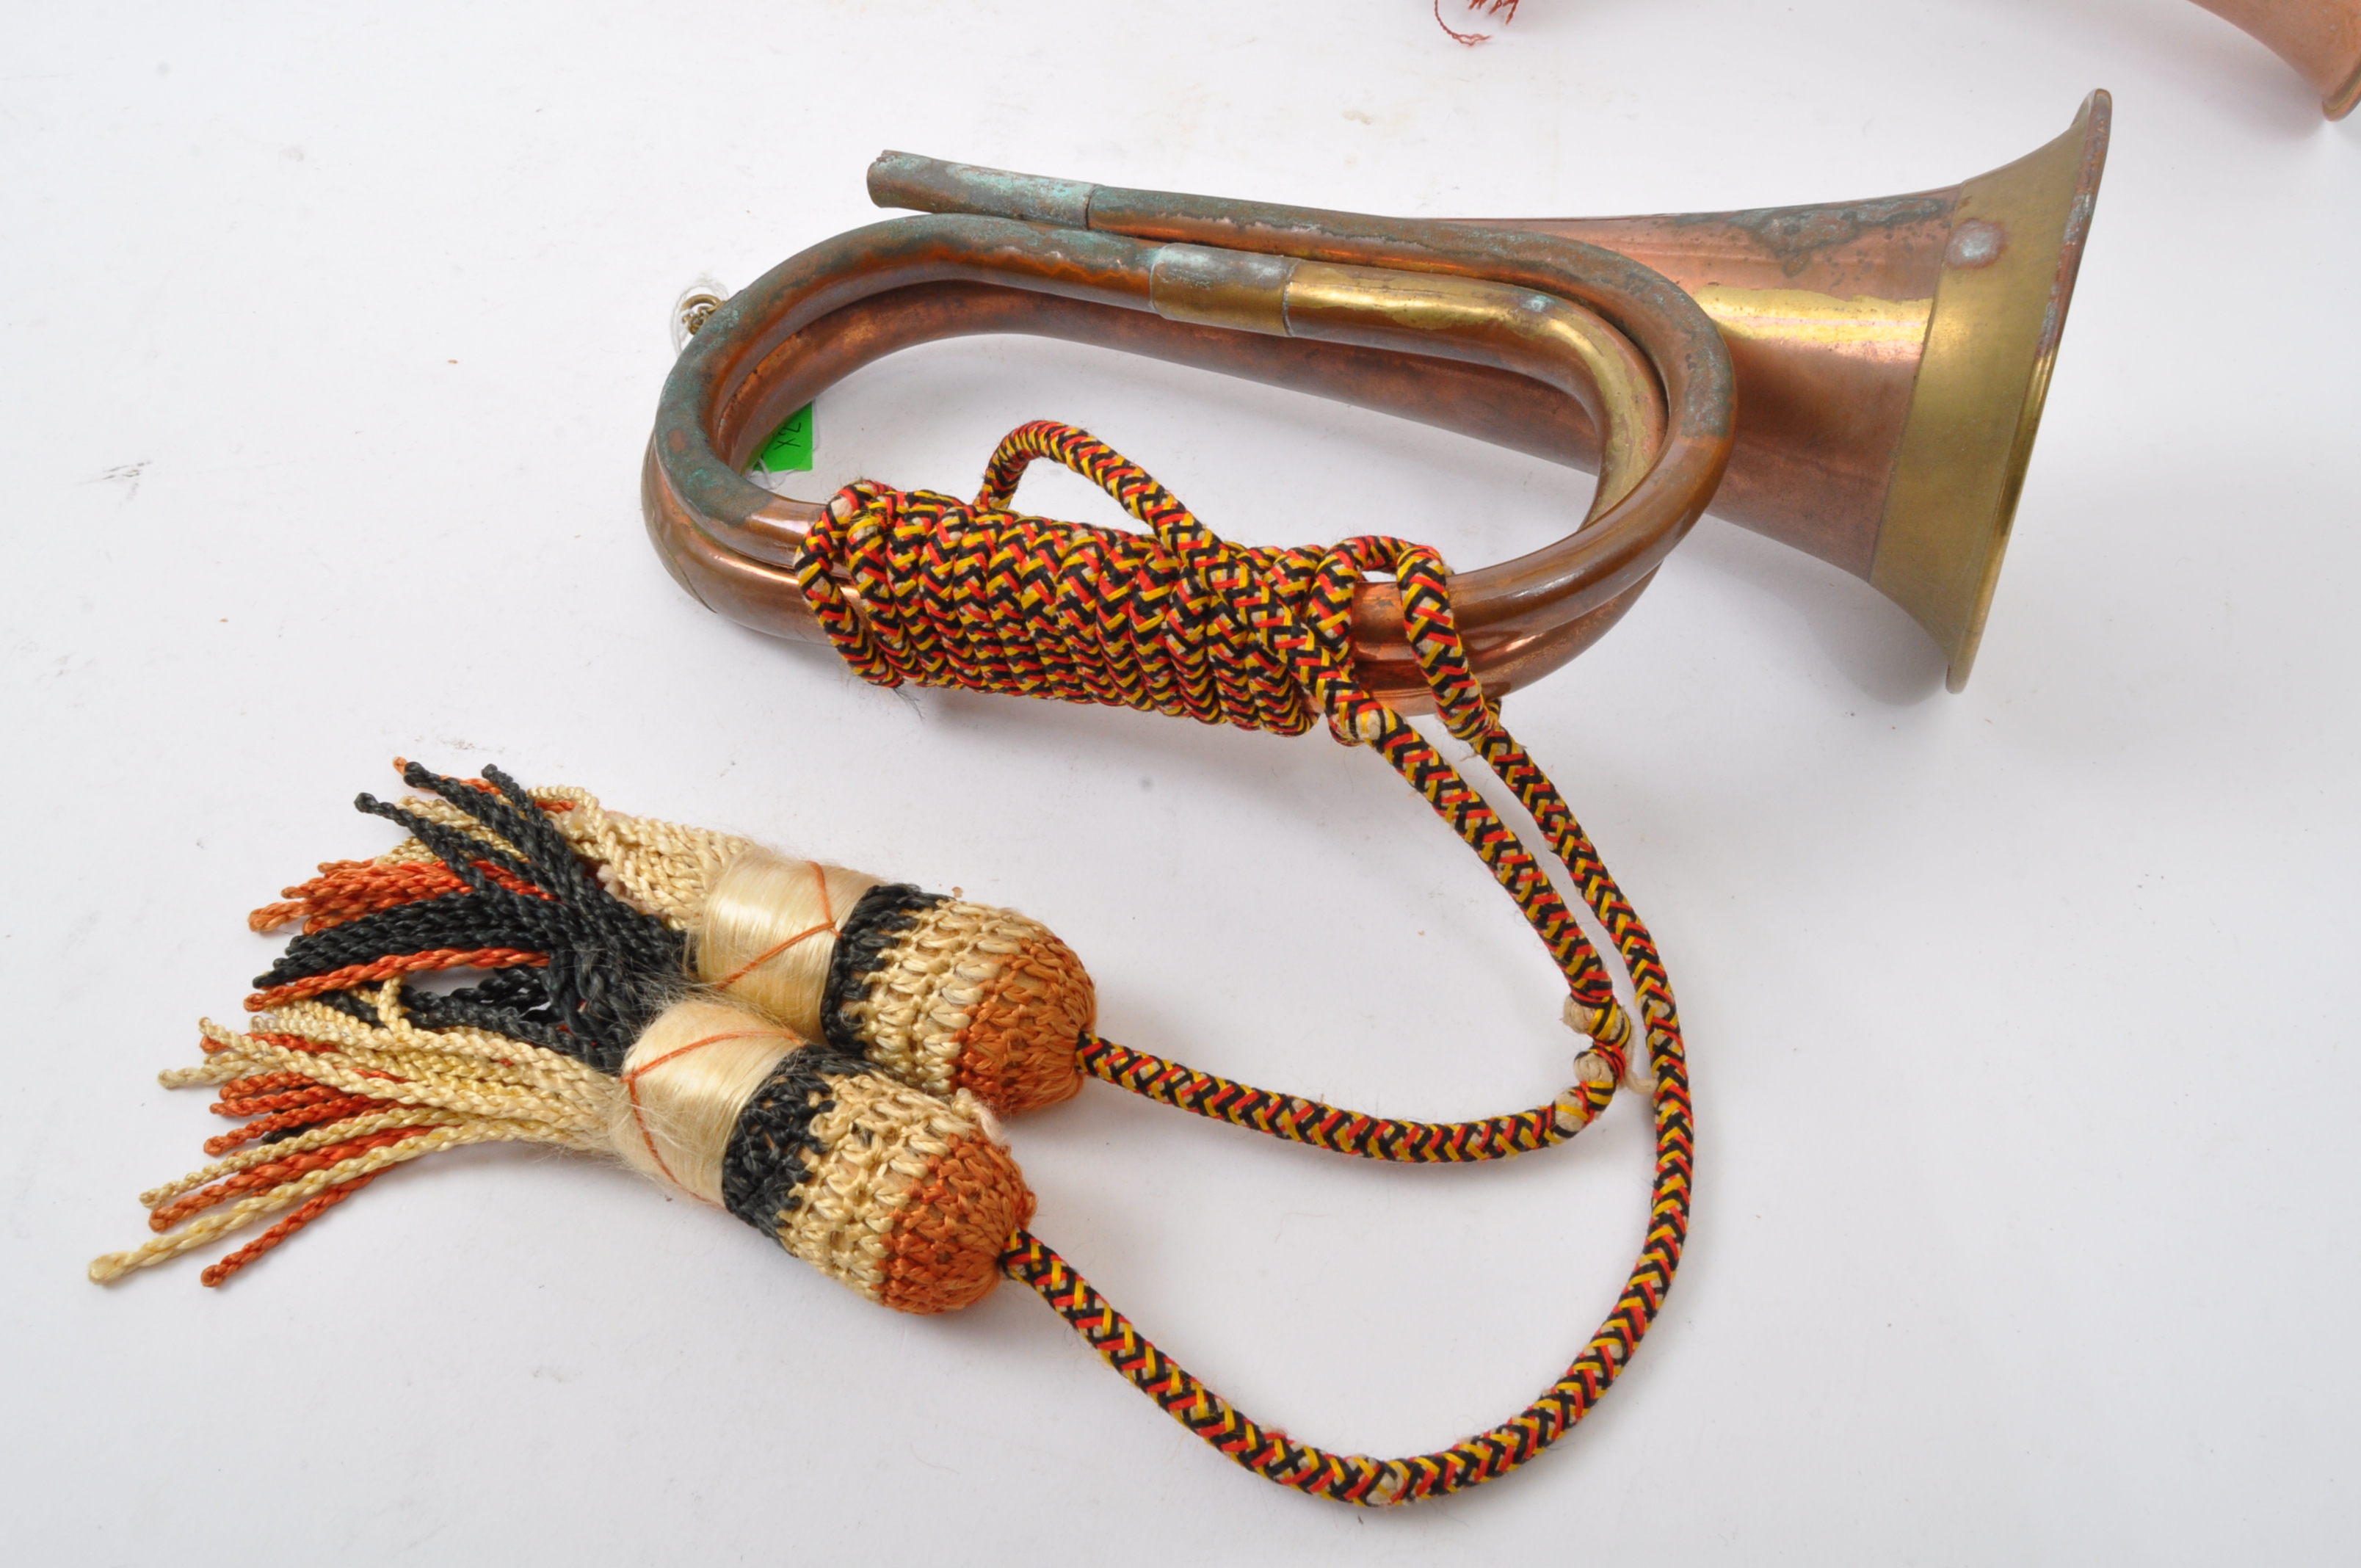 PAIR OF 20TH CENTURY COPPER HORNS - POST HORN & BUGLE - Image 6 of 7